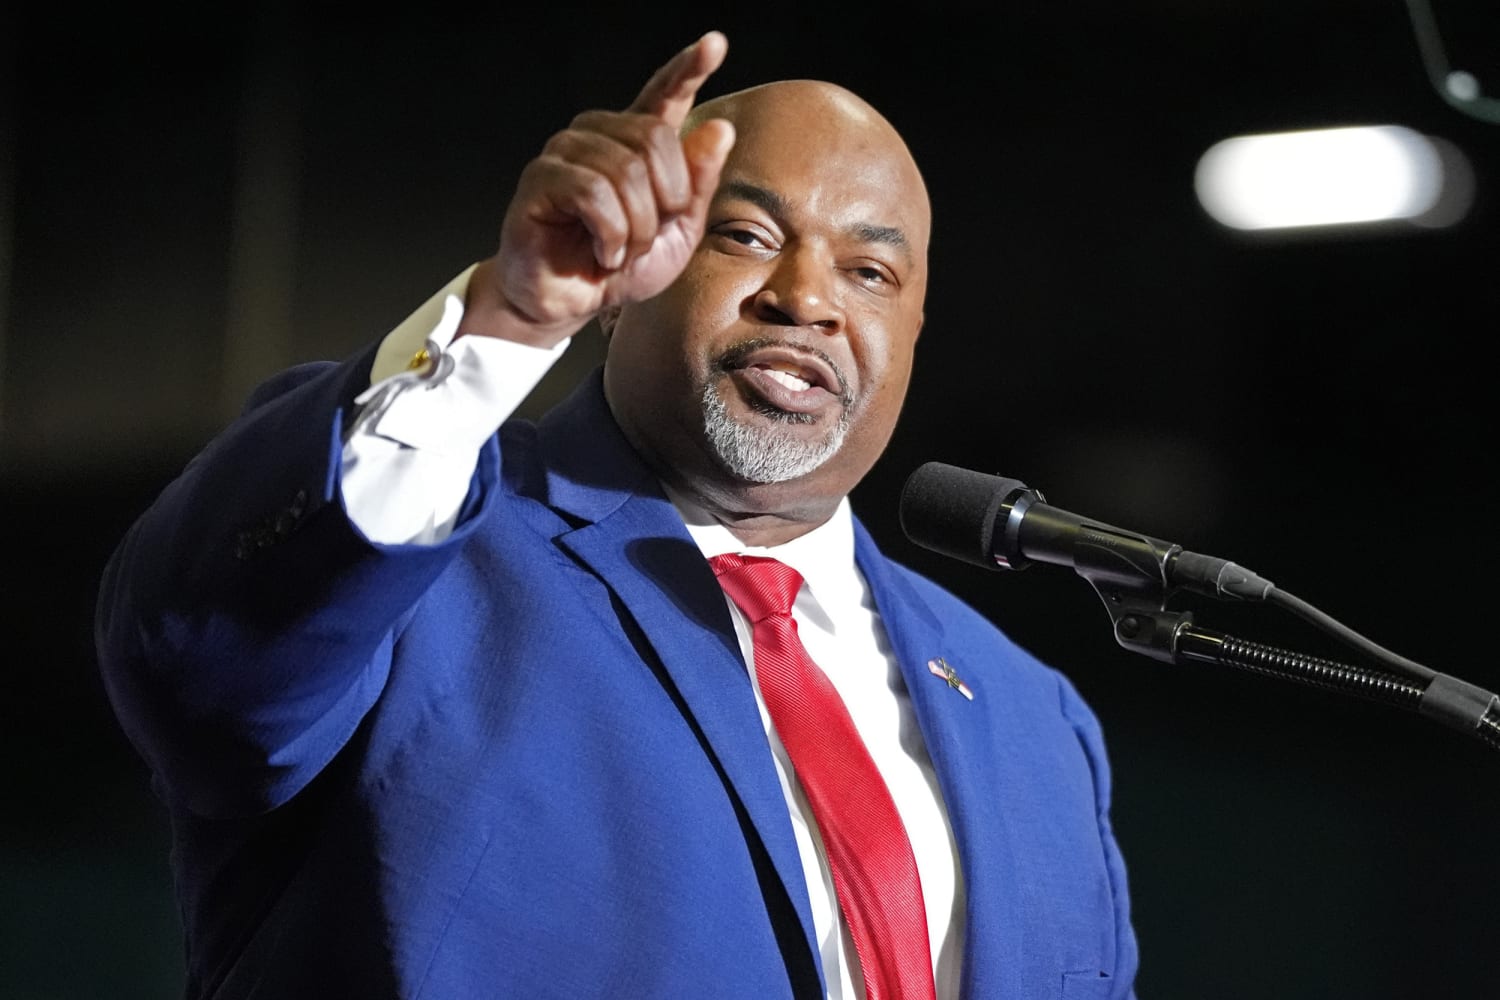 Donald Trump Endorses Mark Robinson: Controversial Comments and Comparisons to Martin Luther King Jr. - Archyde